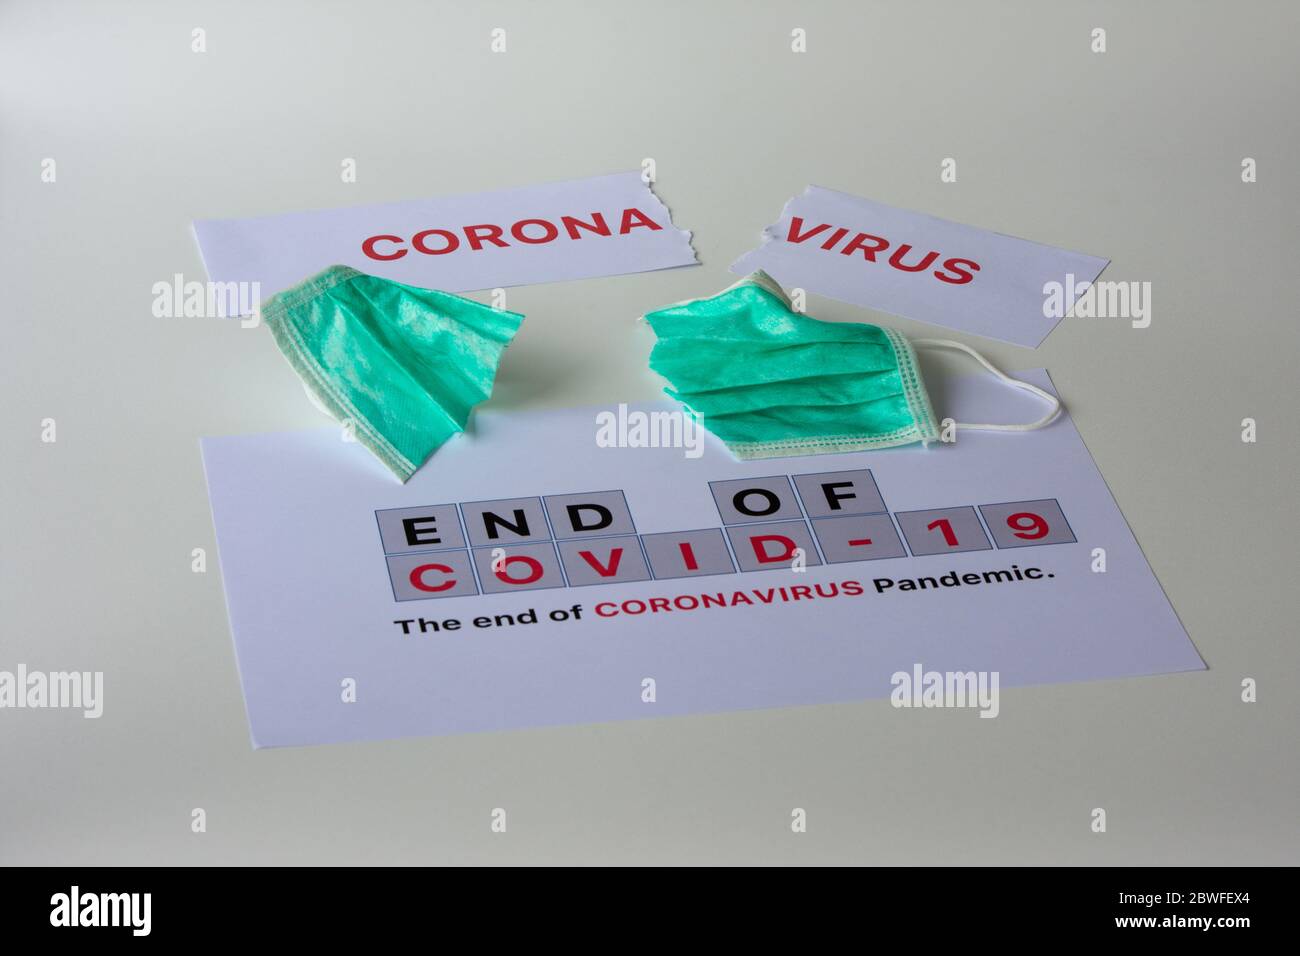 Tearing paper with the word 'Coronavirus' and cutting surgical mask. The end of the Coronavirus pandemic concept. Stock Photo